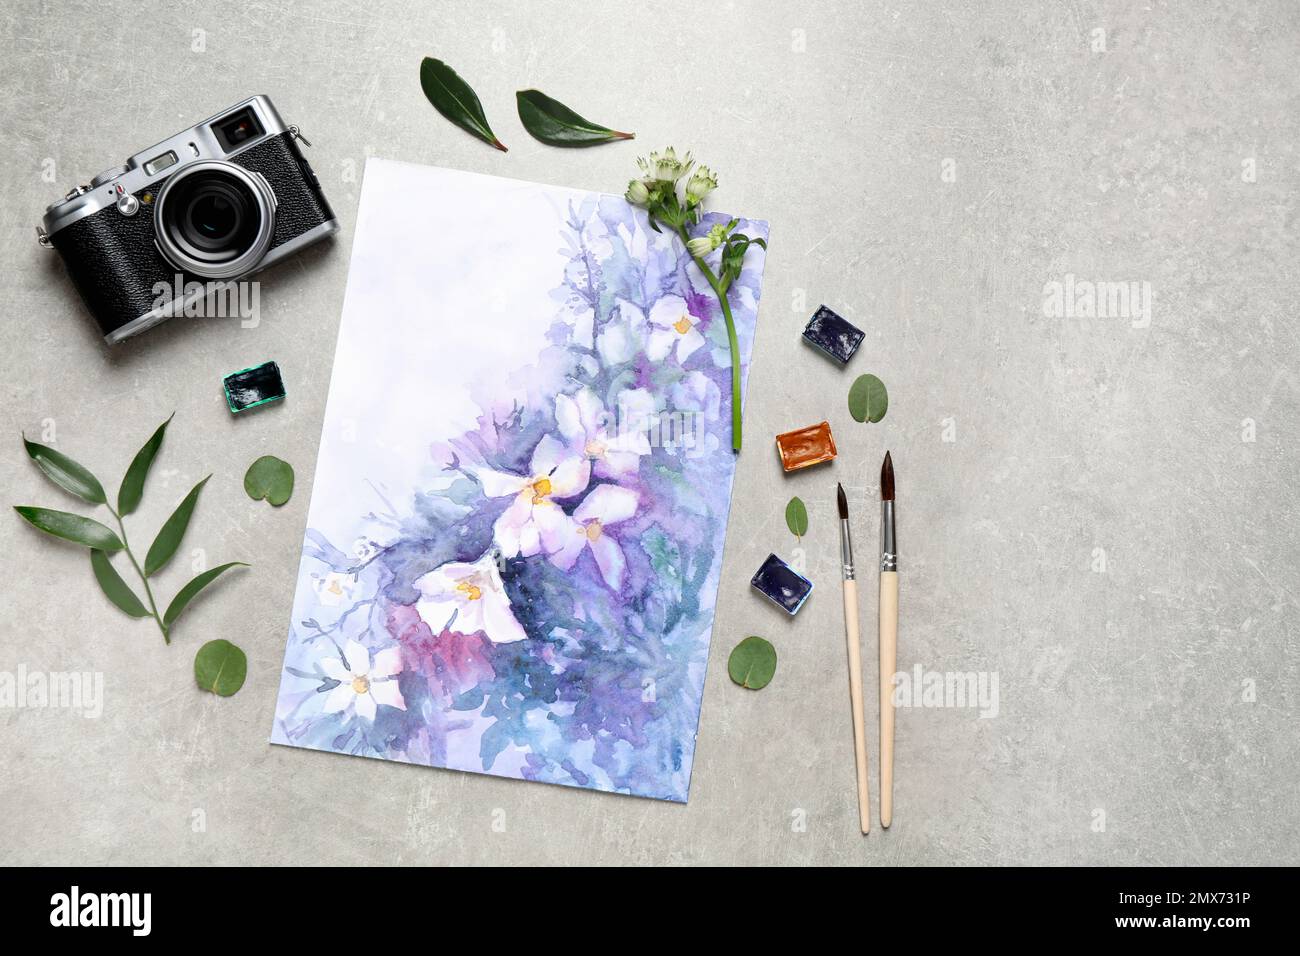 Flat lay composition with watercolor paints and floral picture on grey stone table Stock Photo